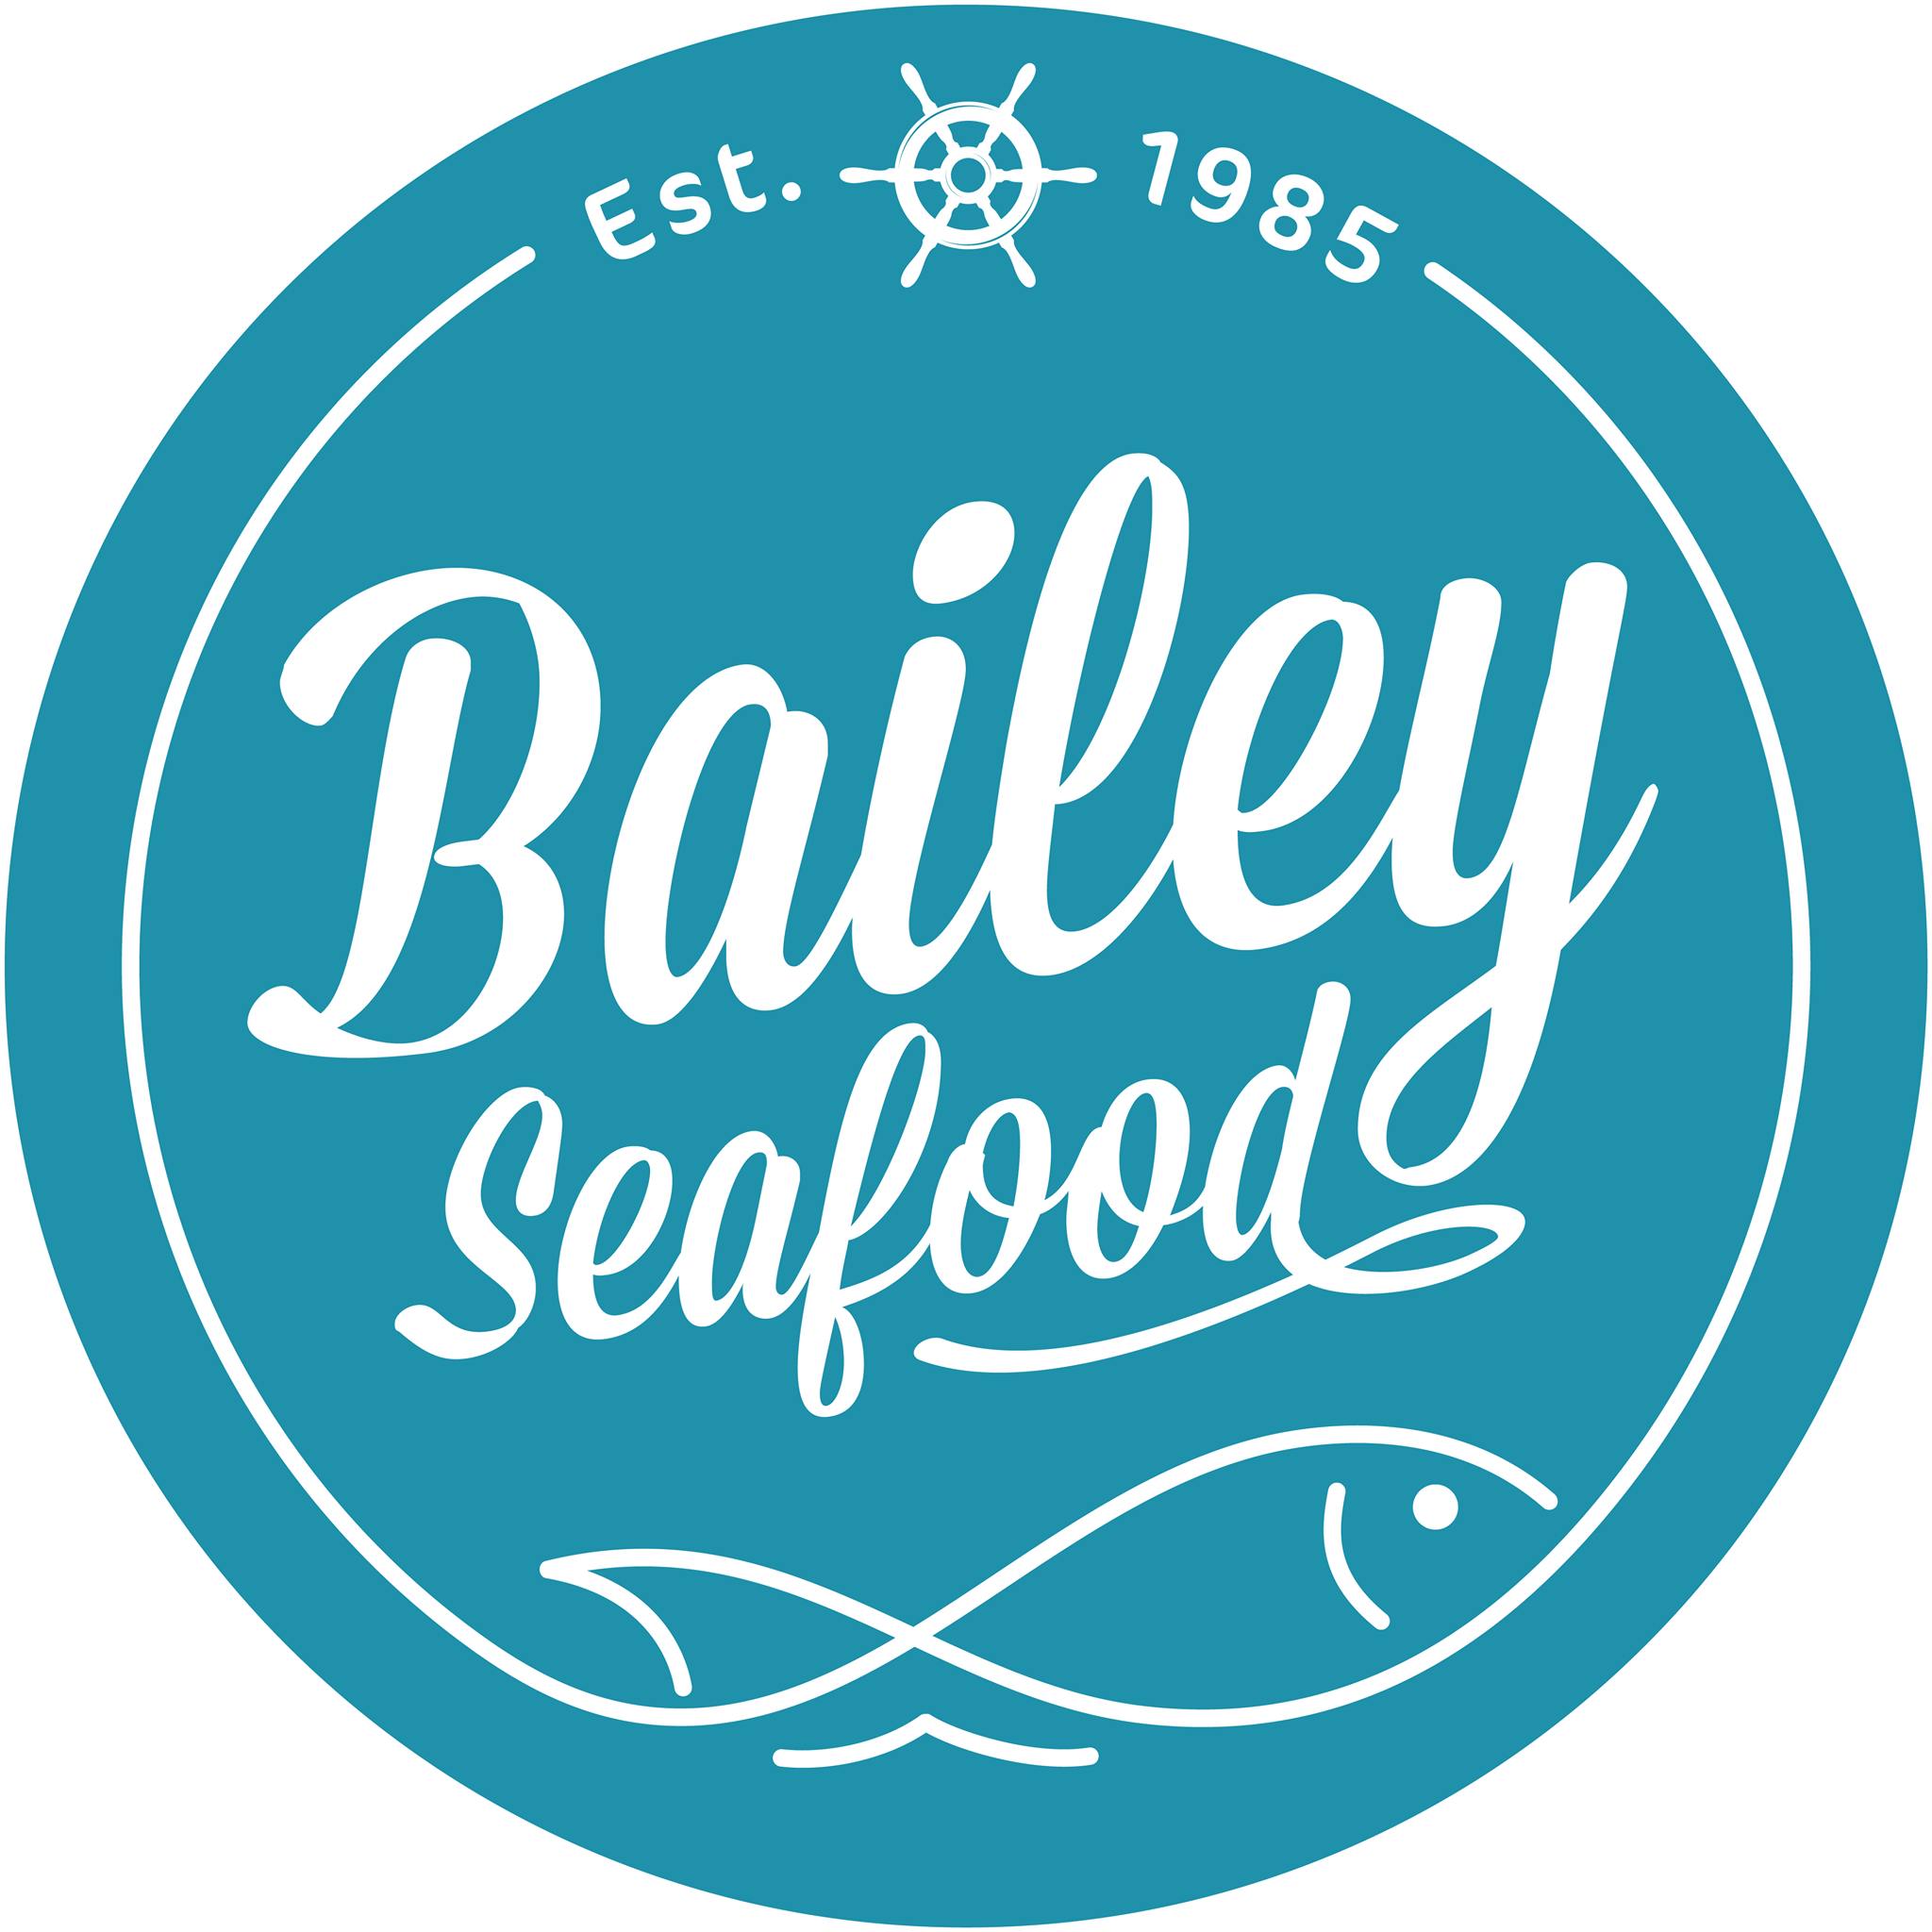 Bailey Seafood Menu and Delivery in Buffalo NY, 14215